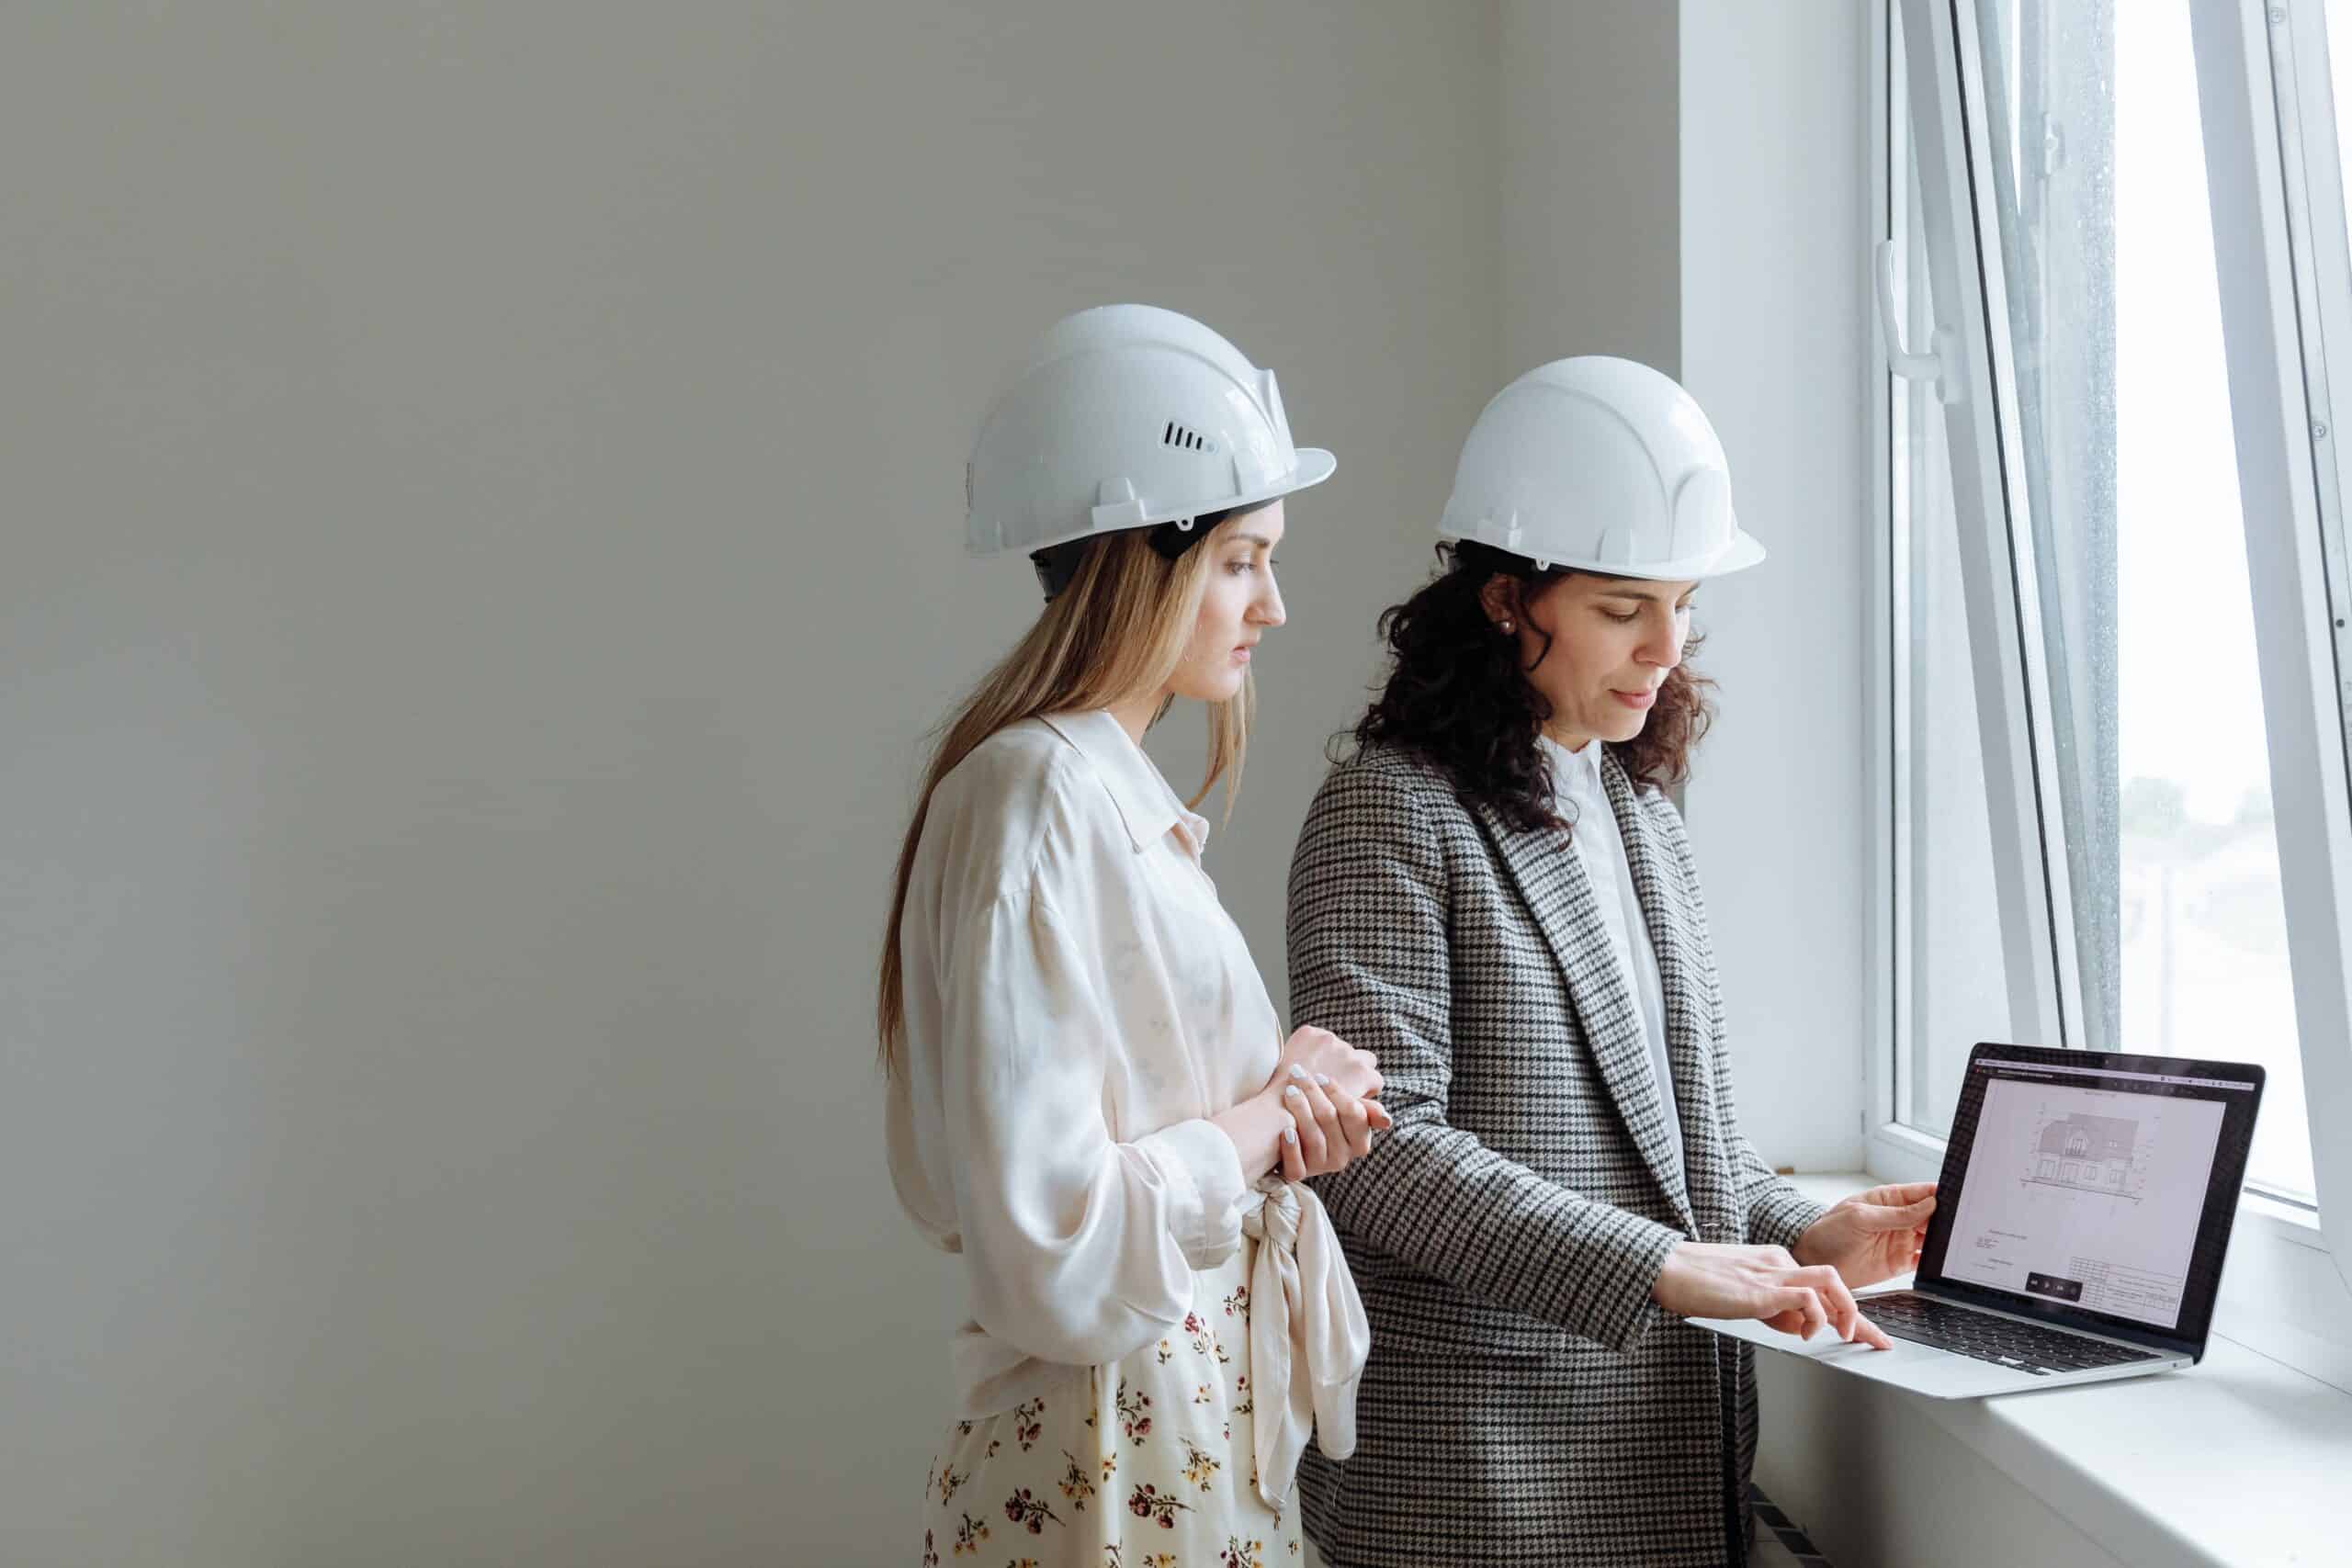 A photo of two women professionally dressed wearing hard hats and standing next to a window looking at a laptop screen.